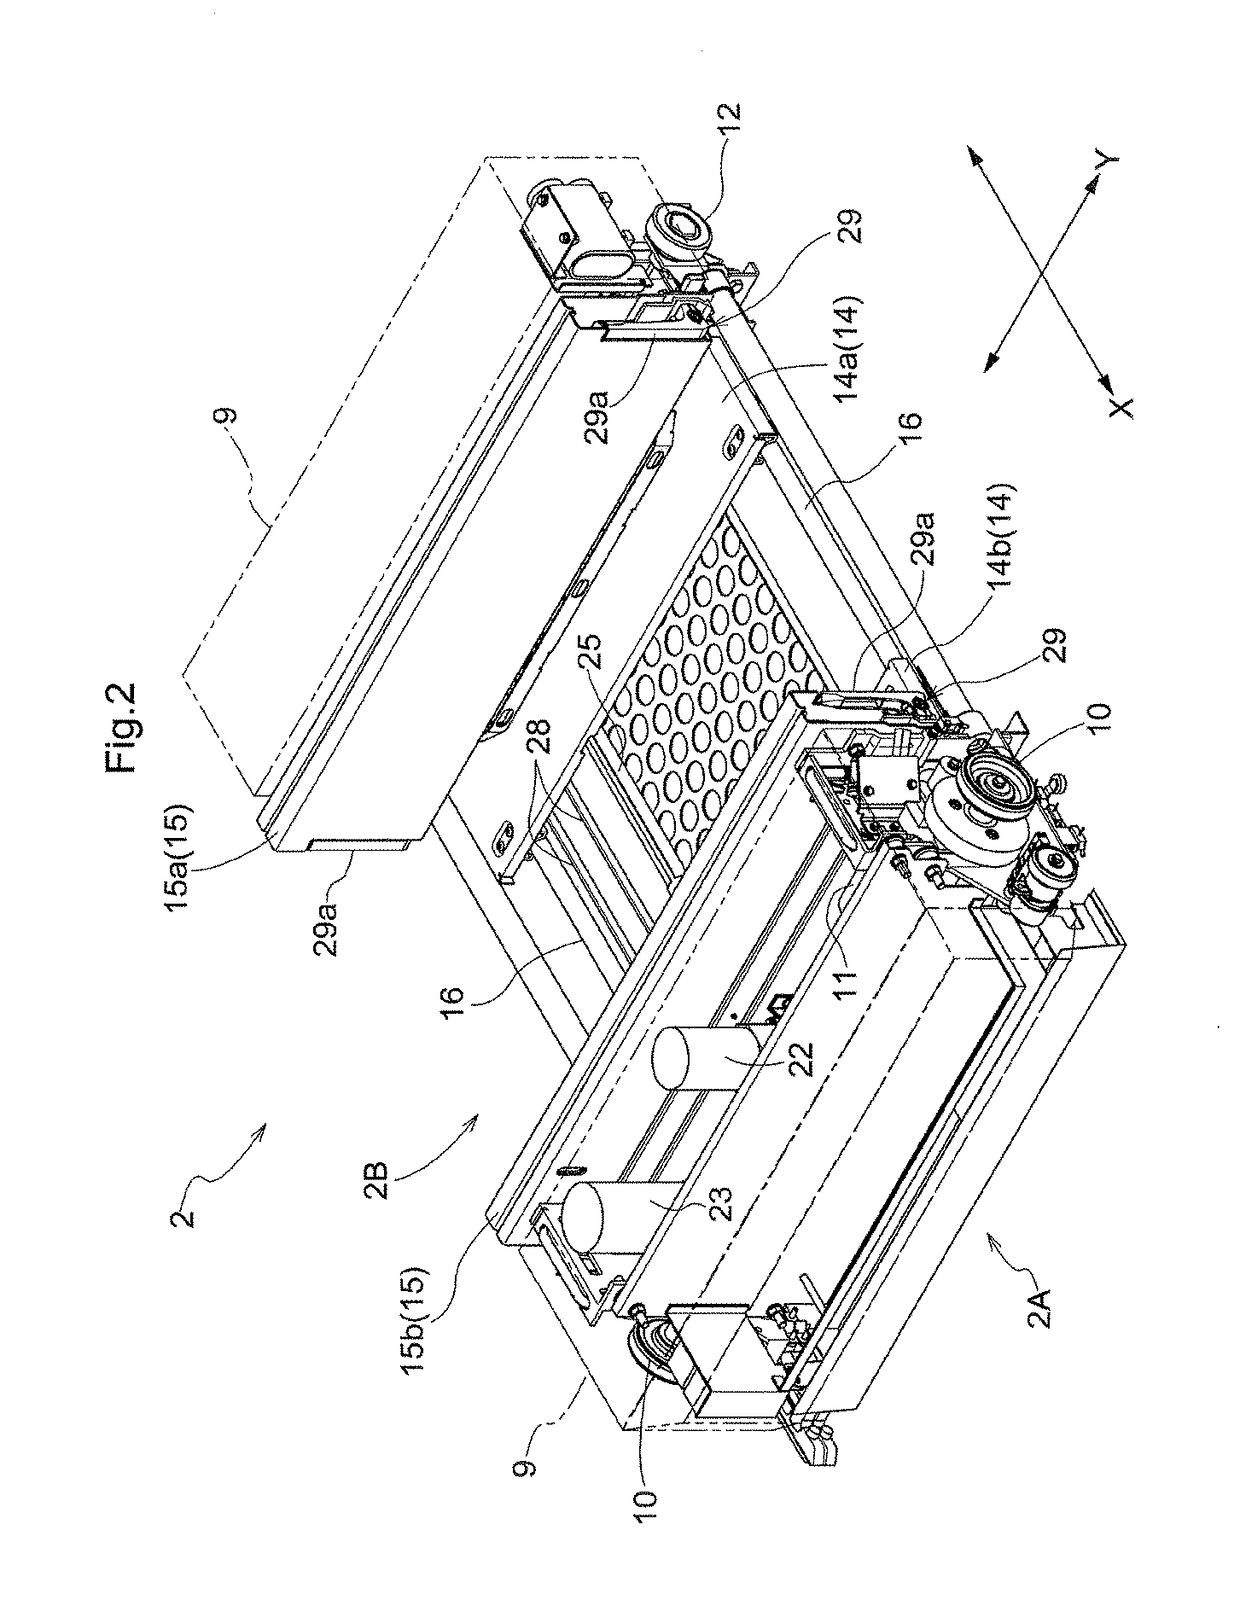 Article transfer device and article transport facility